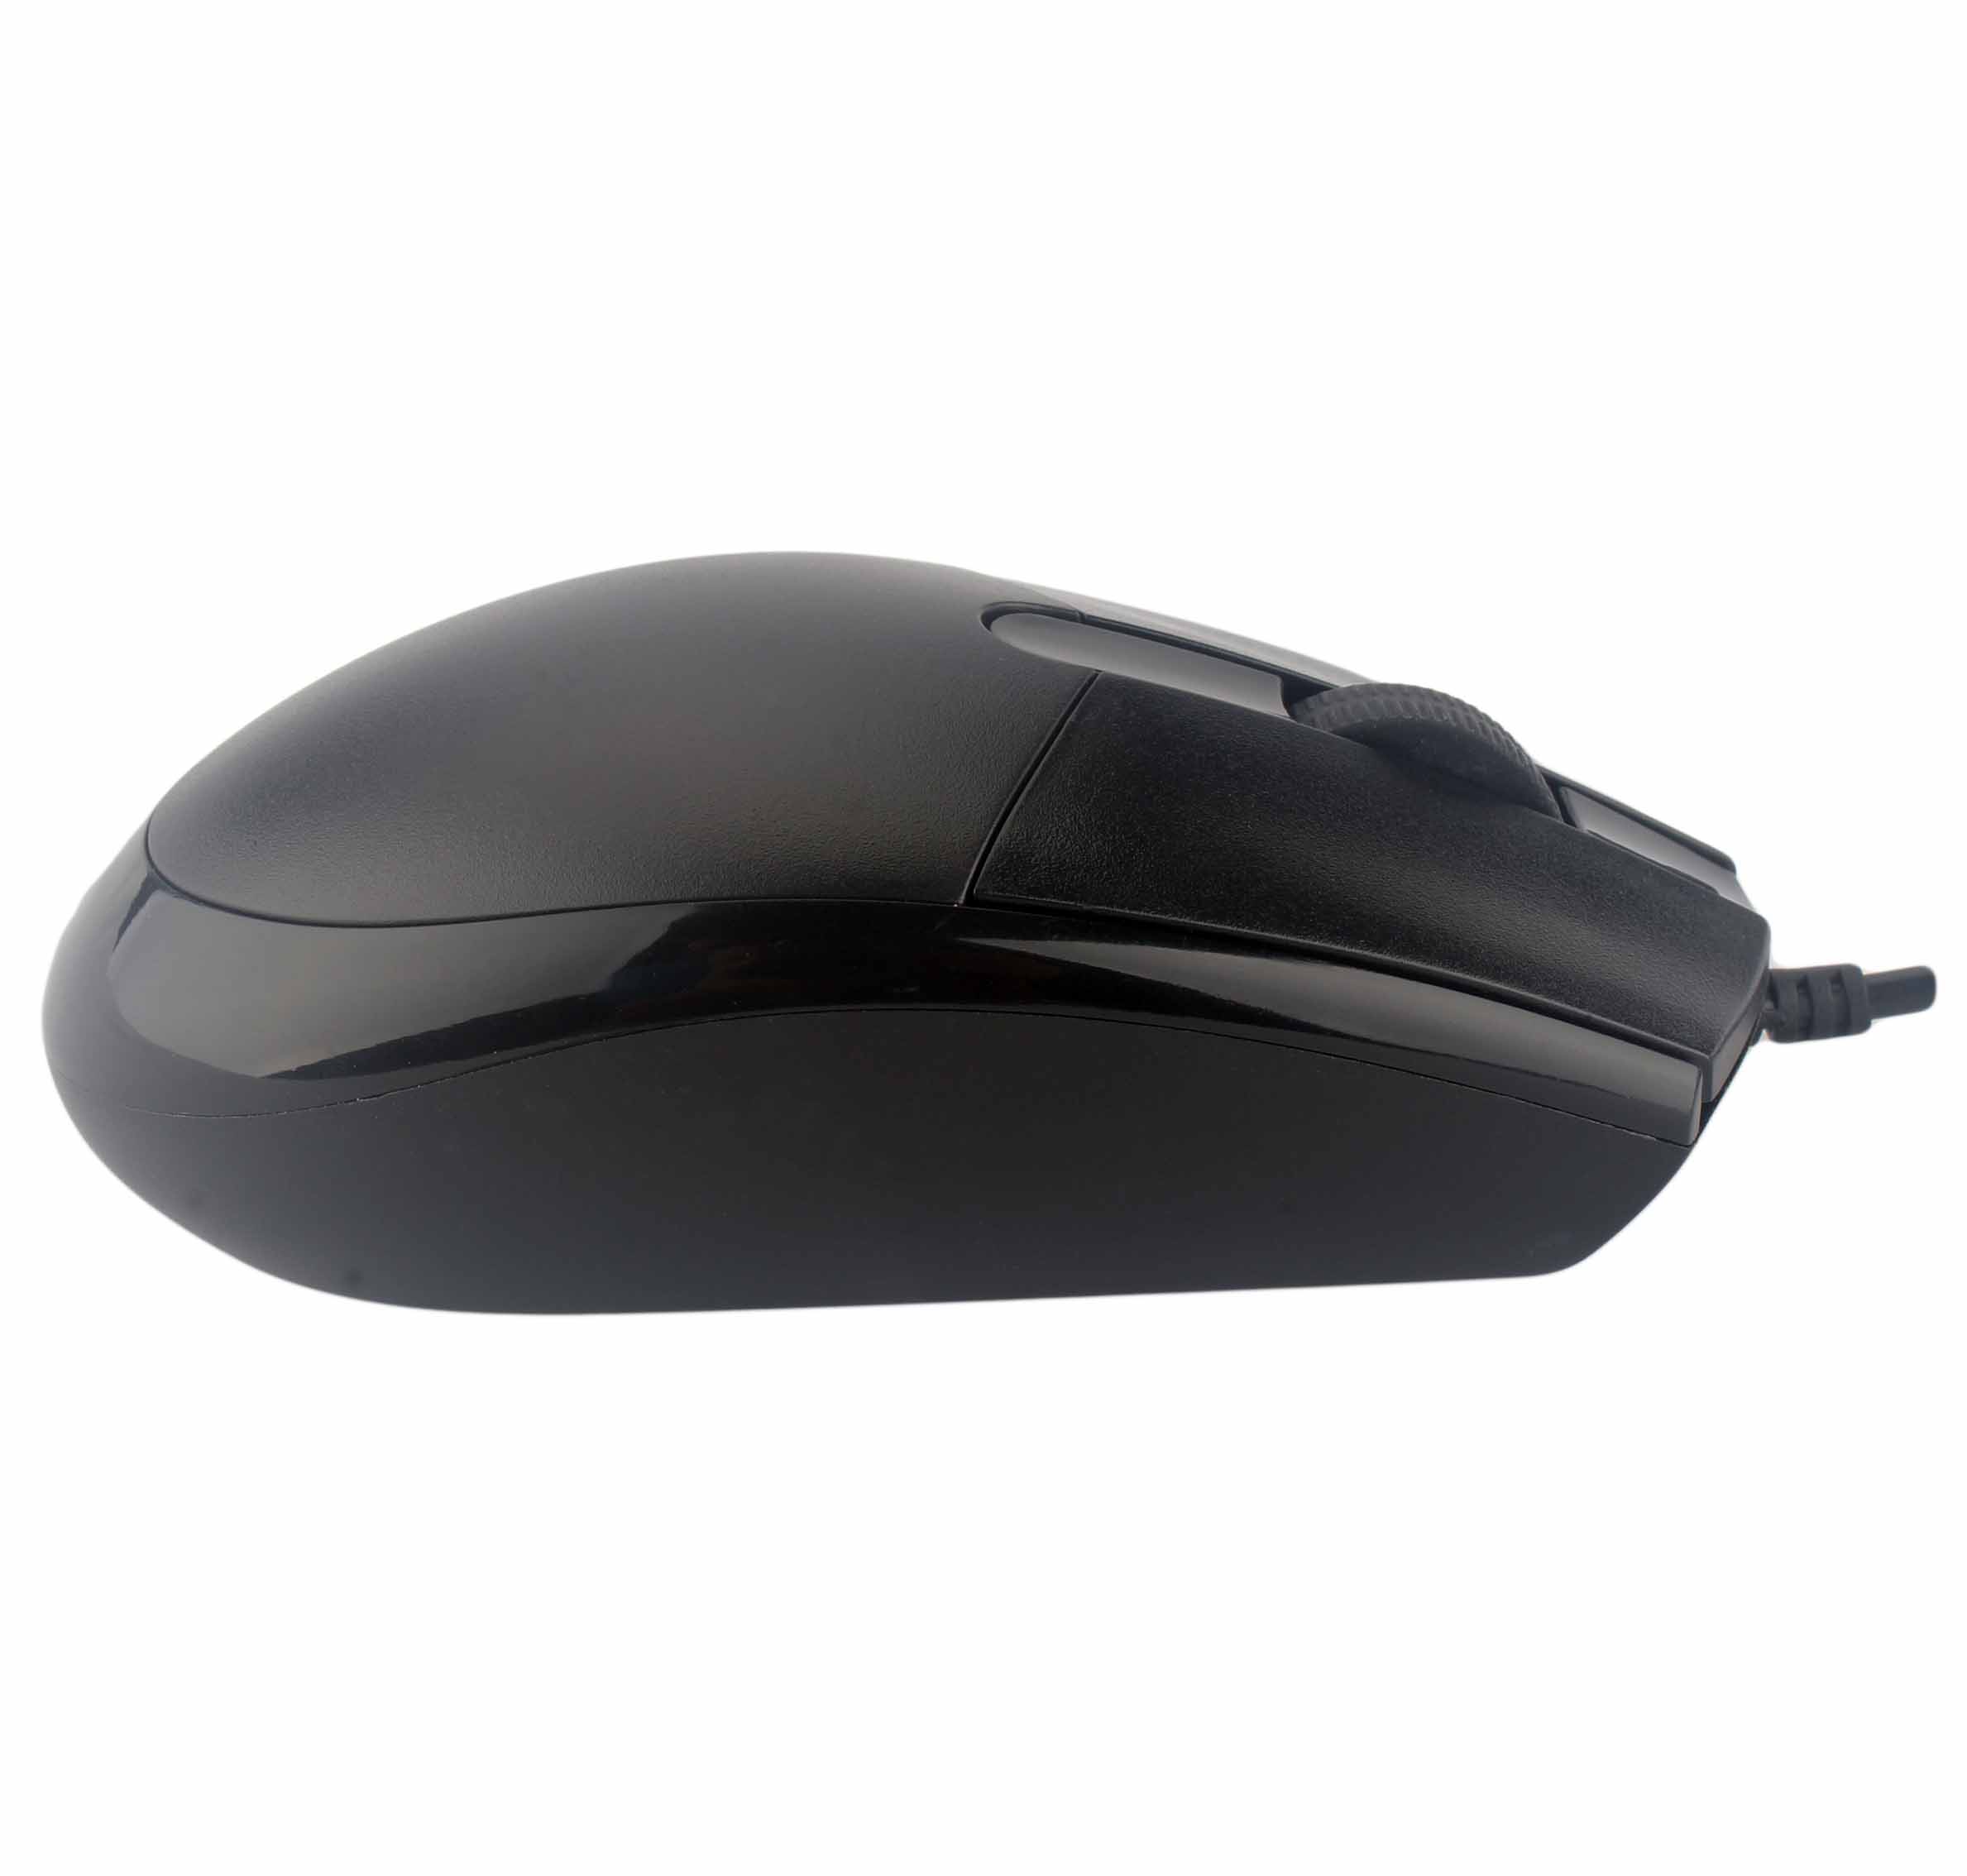 Computer Mouse Big size,Rubber Scroll For Smooth Touch